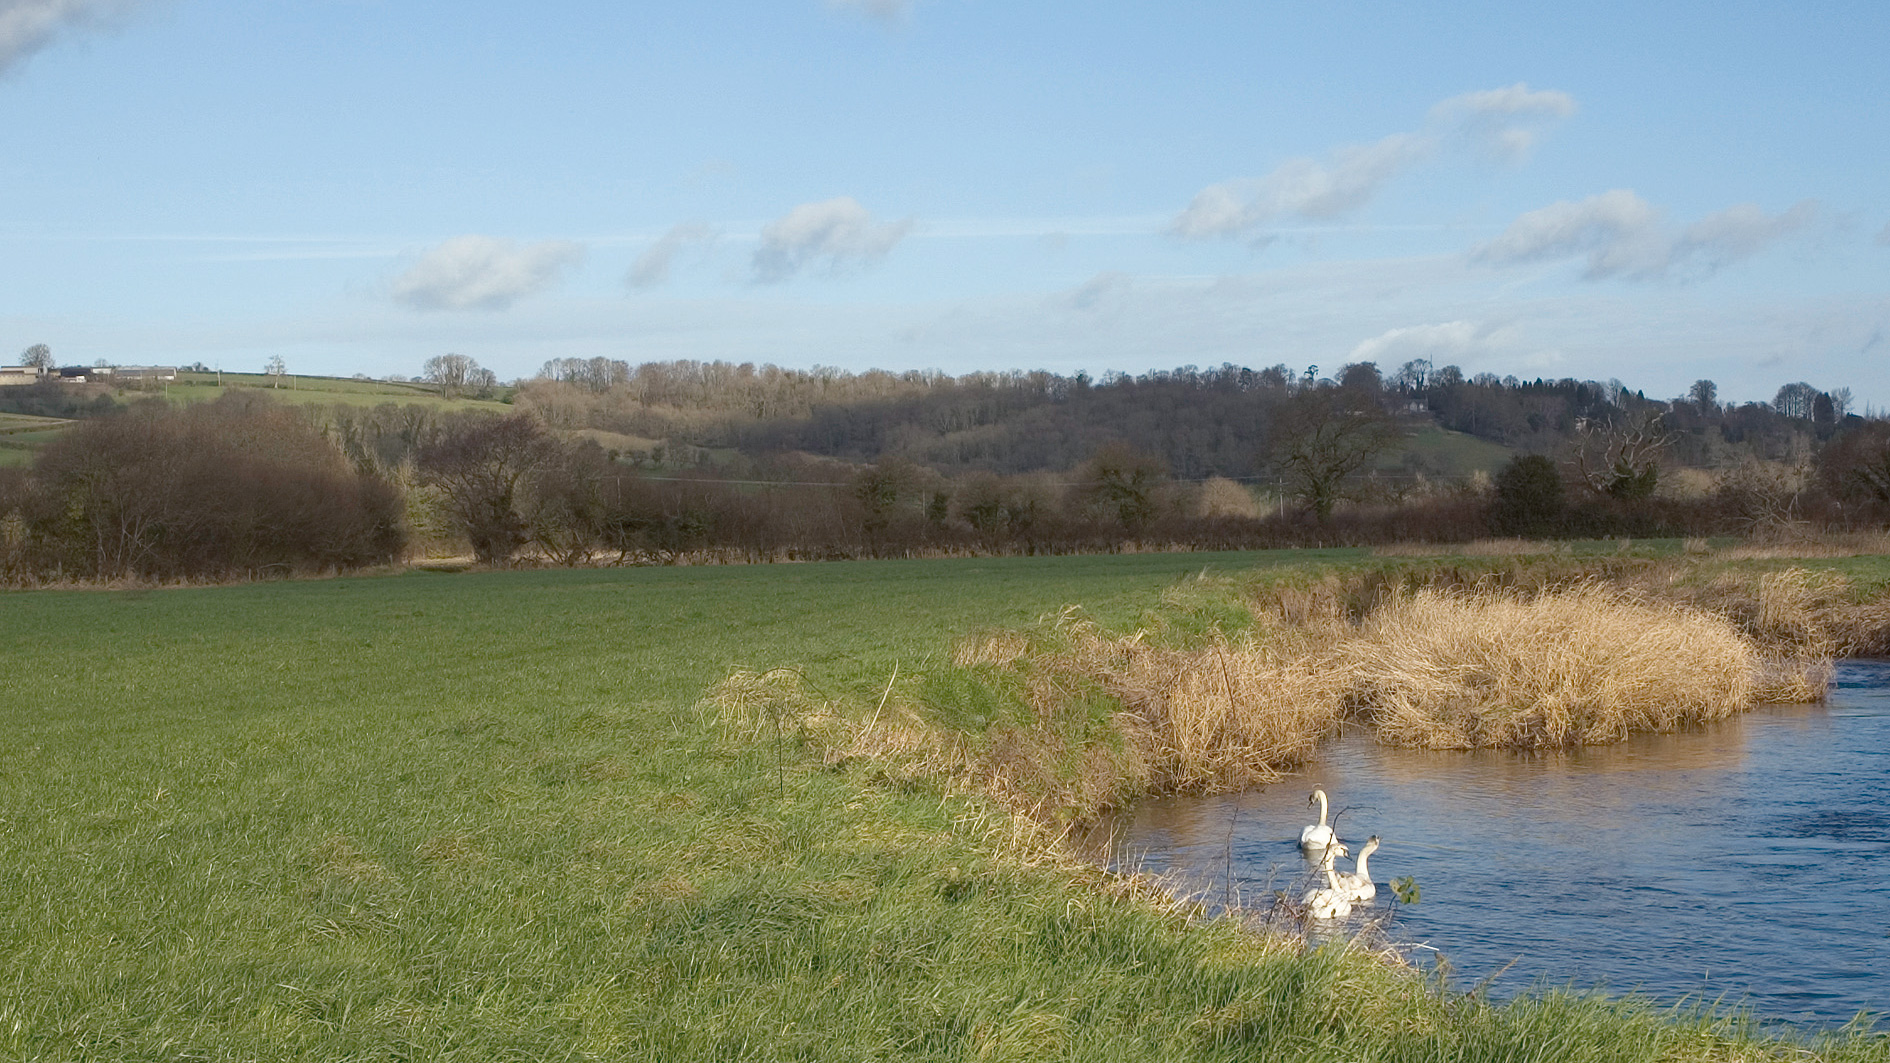 Land for sale next to river in Axminster